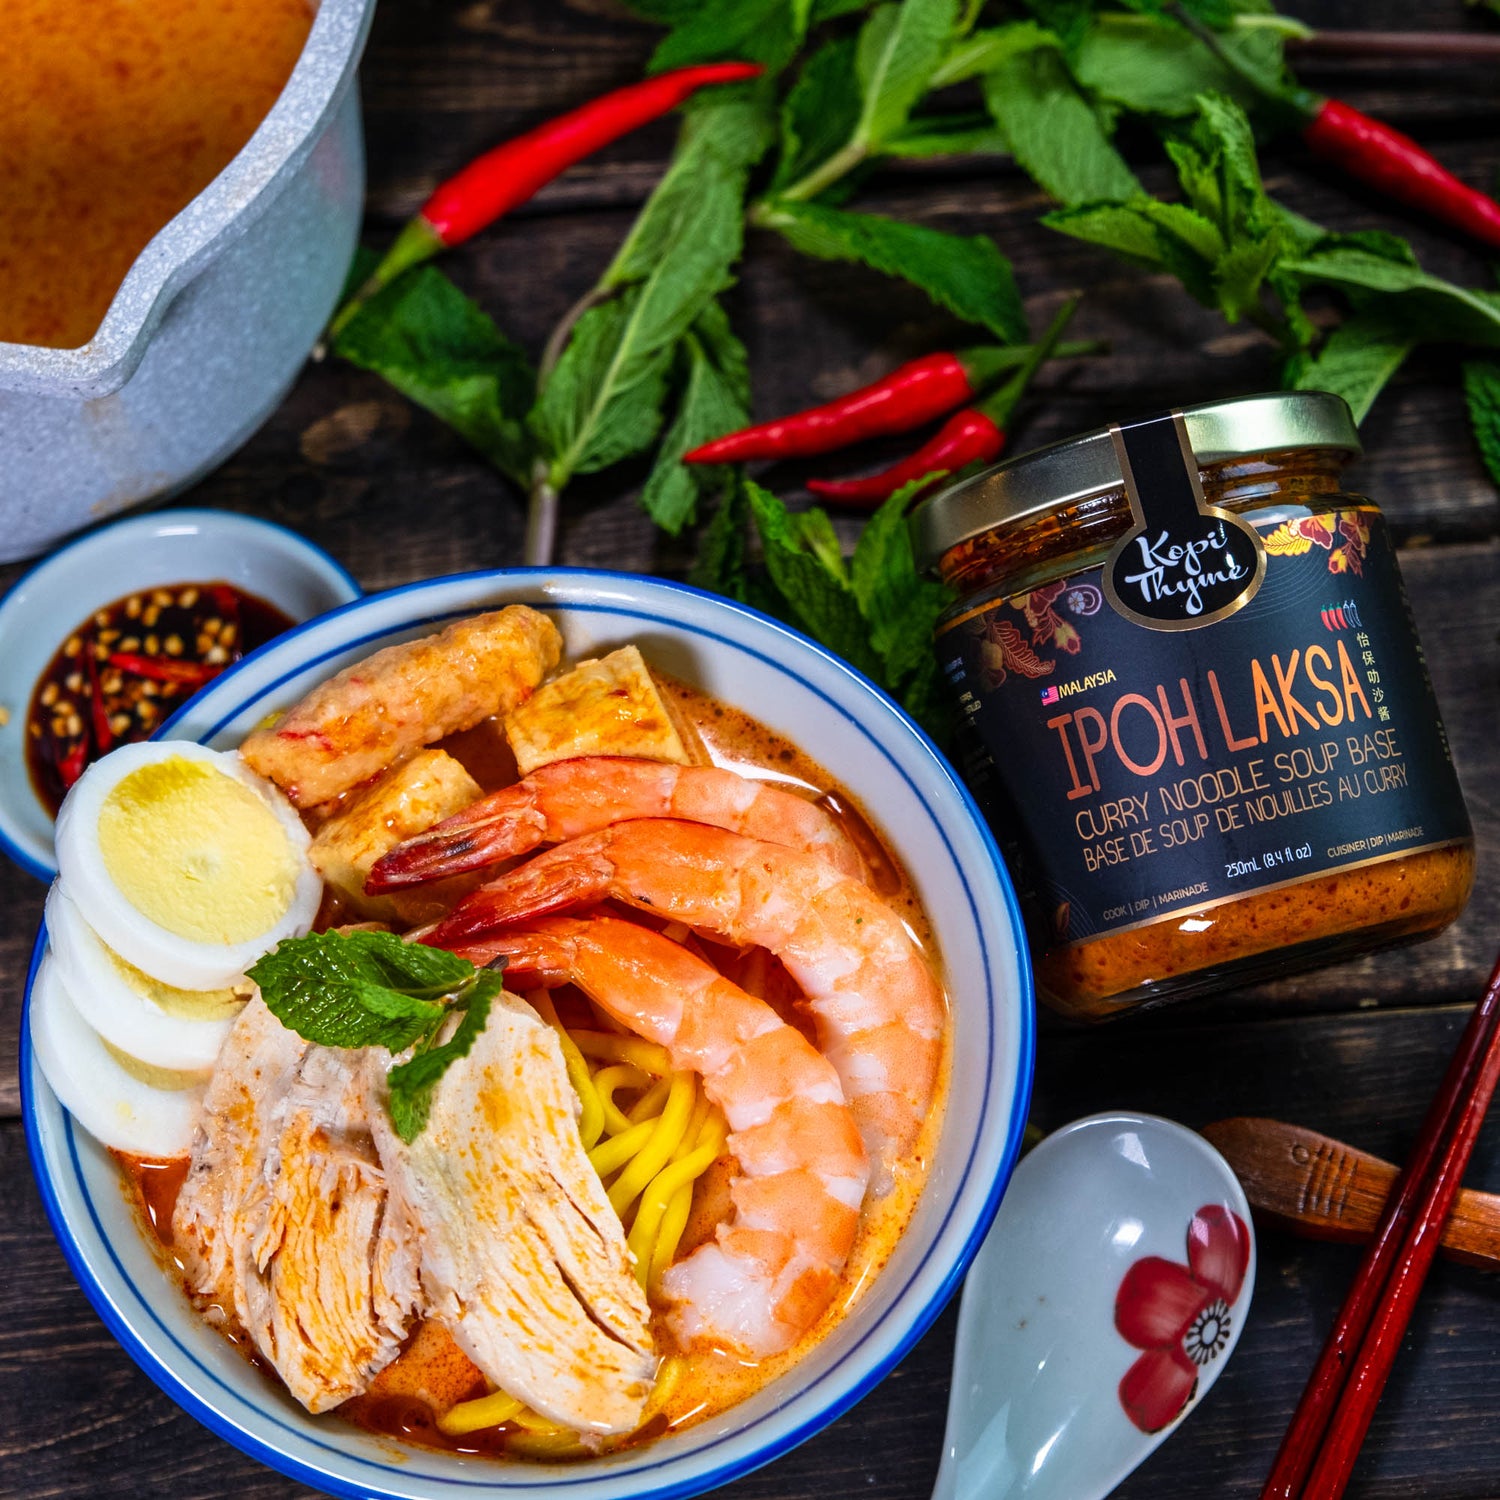 Kopi Thyme Ipoh Laksa, create Southeast Asian comfort food in minutes. Tying in nostalgia and comfort in a jar.